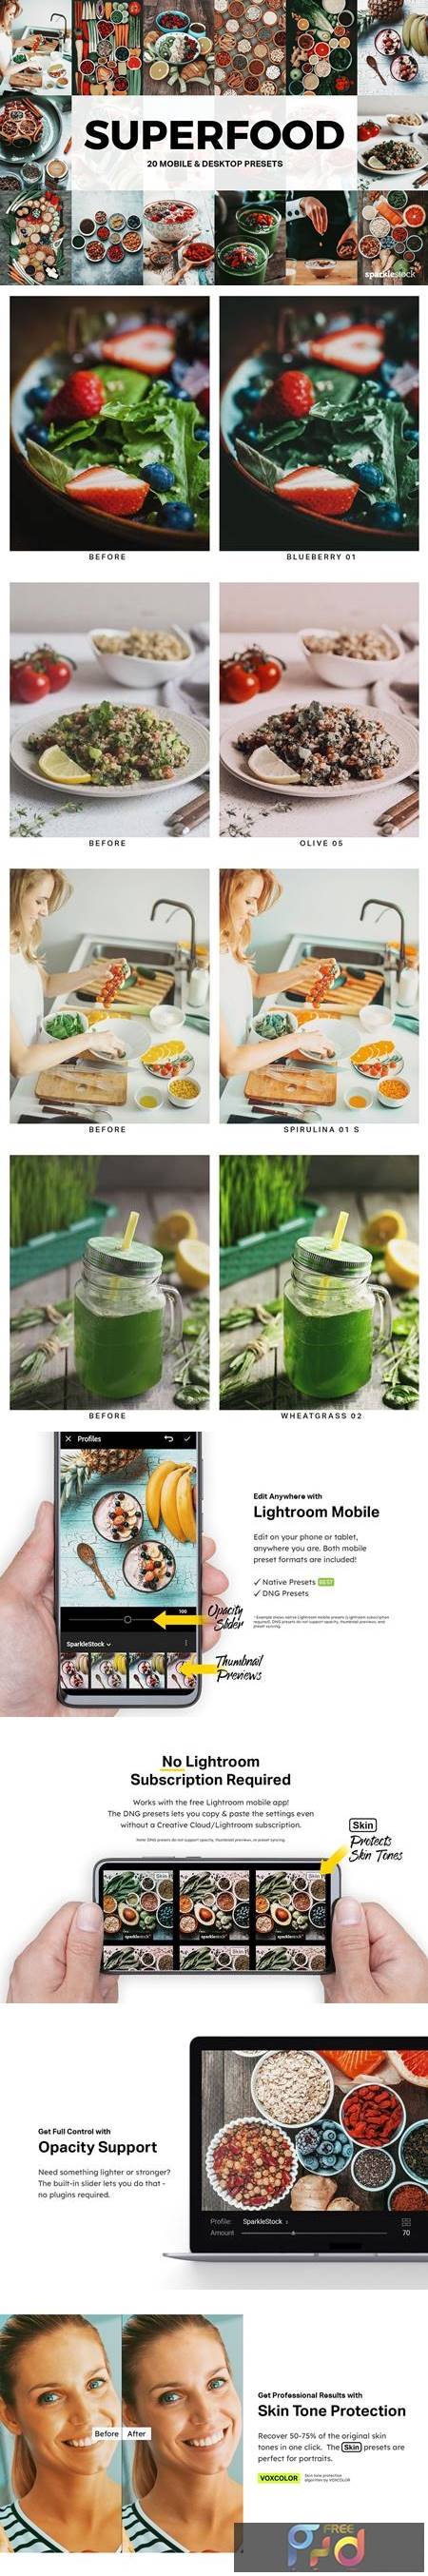 20 Superfood Lightroom Presets and LUTs 5196710 1